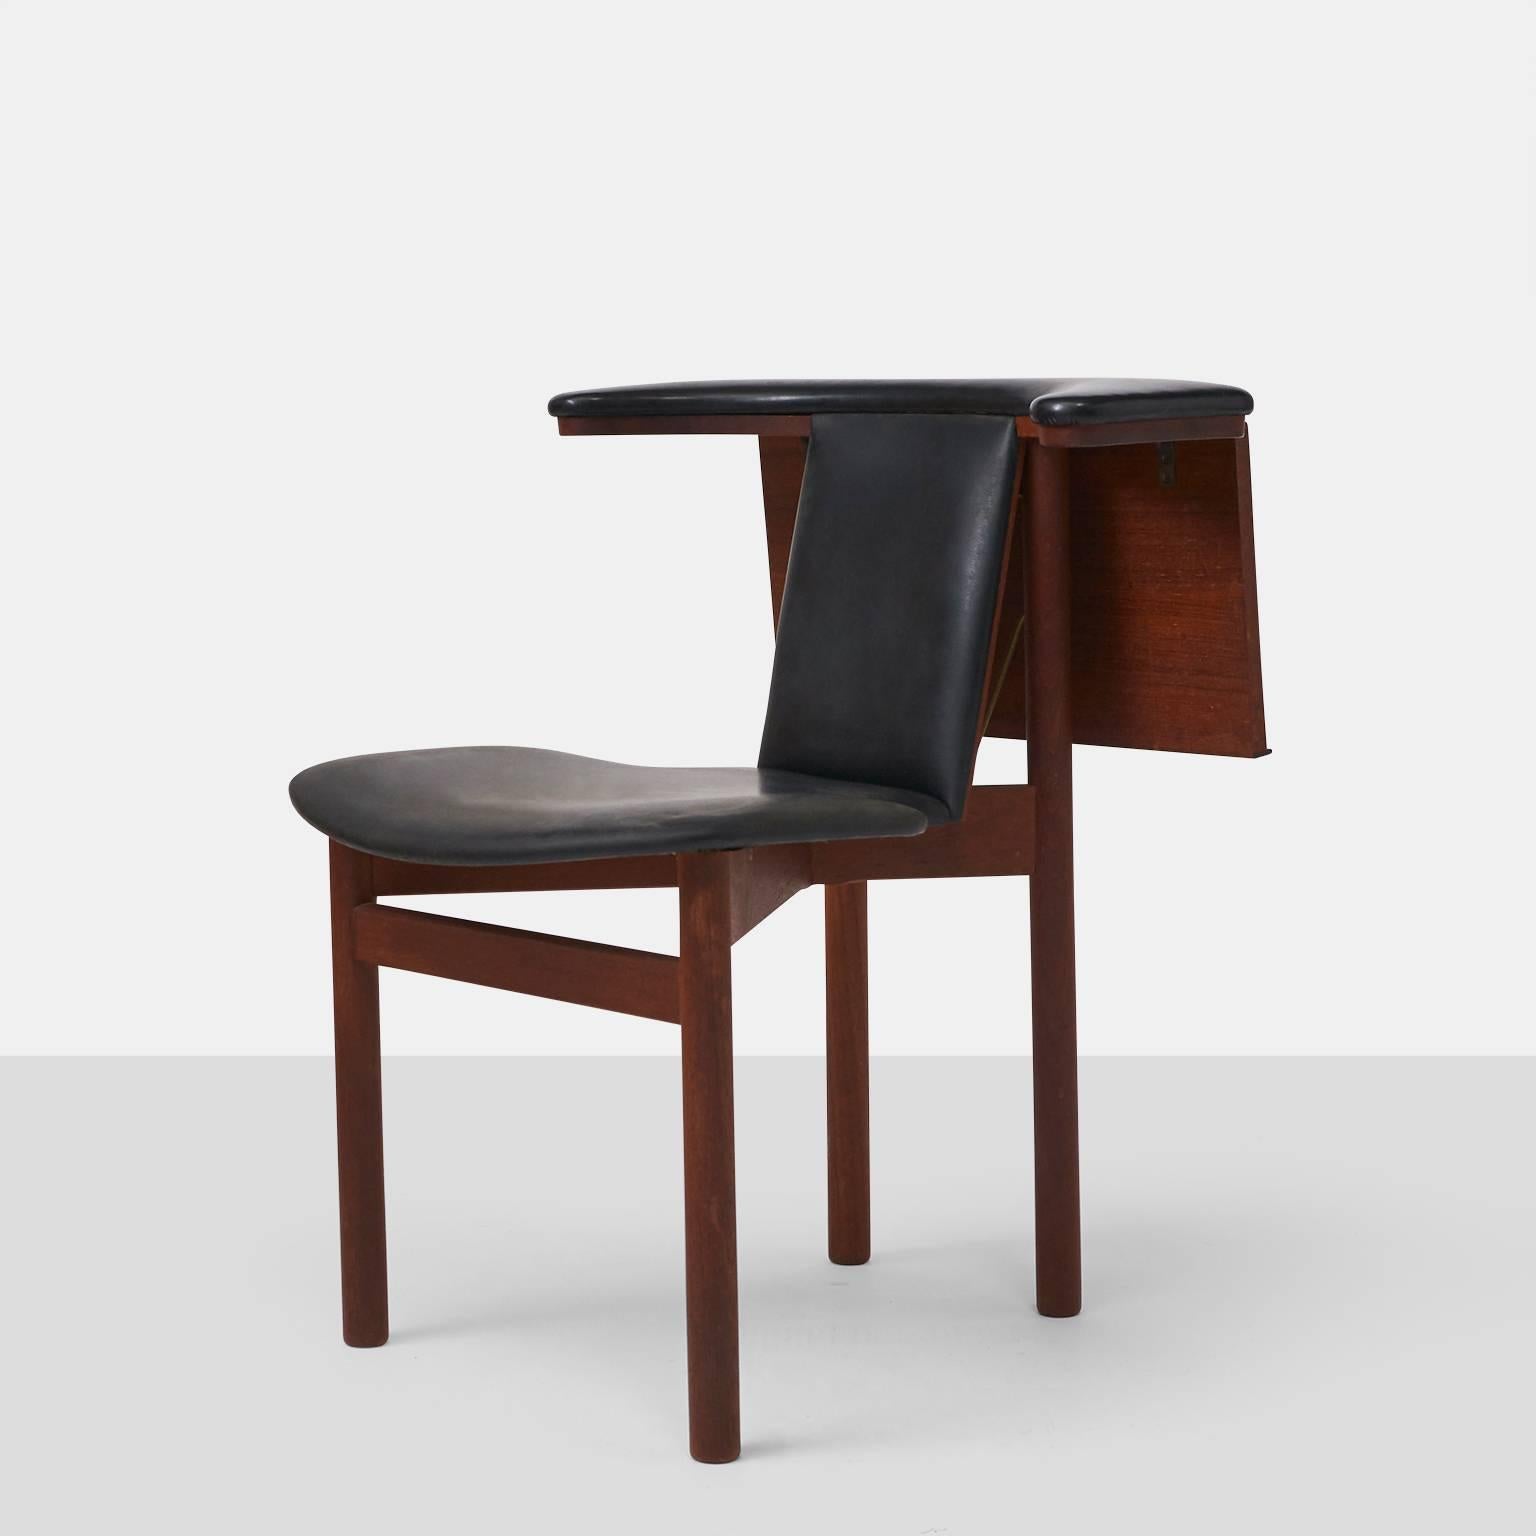 A side chair with black leather seat and back with a drop leaf style adjustable shelf on the back for reading or eating. Designed in 1964 by Hans Olsen. Teak frame.